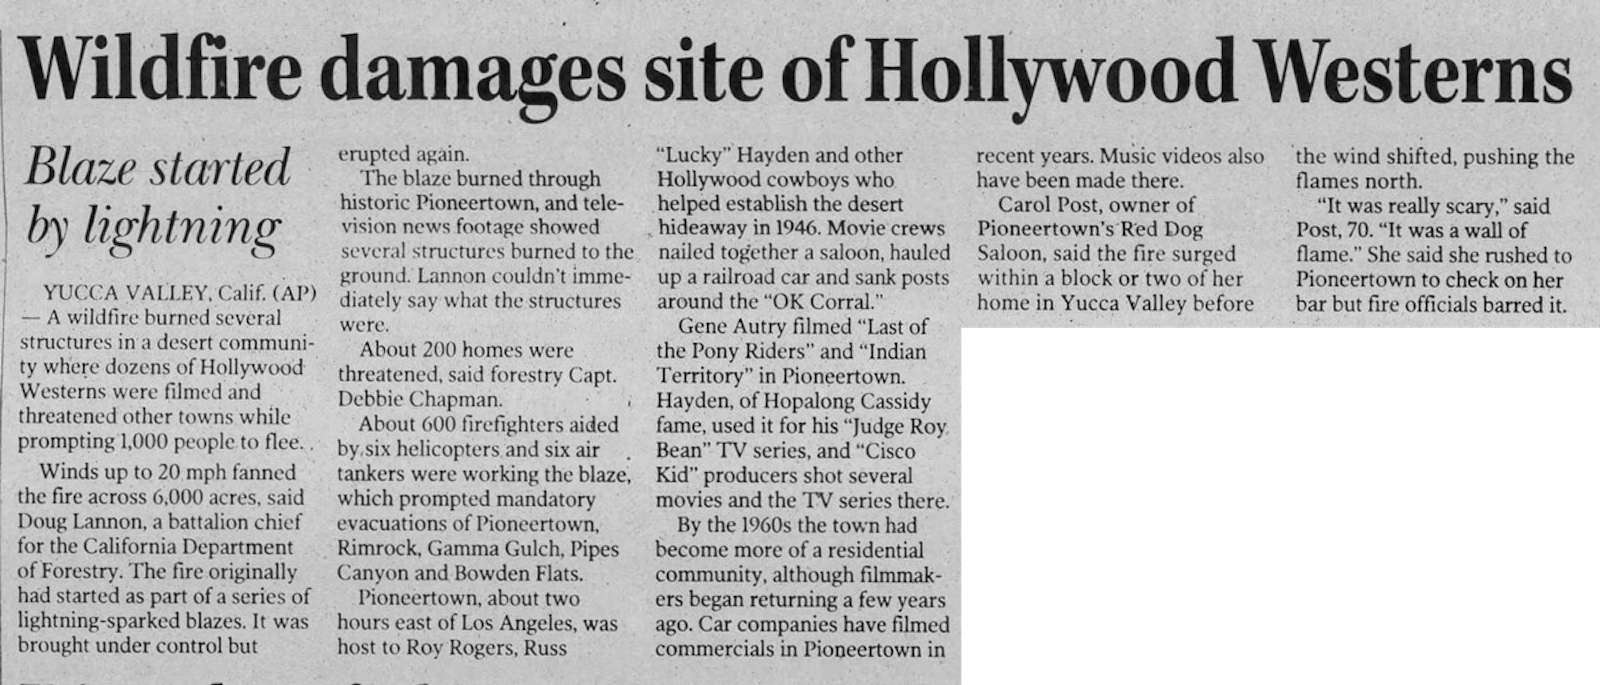 July 12, 2006 Wildfire article clipping